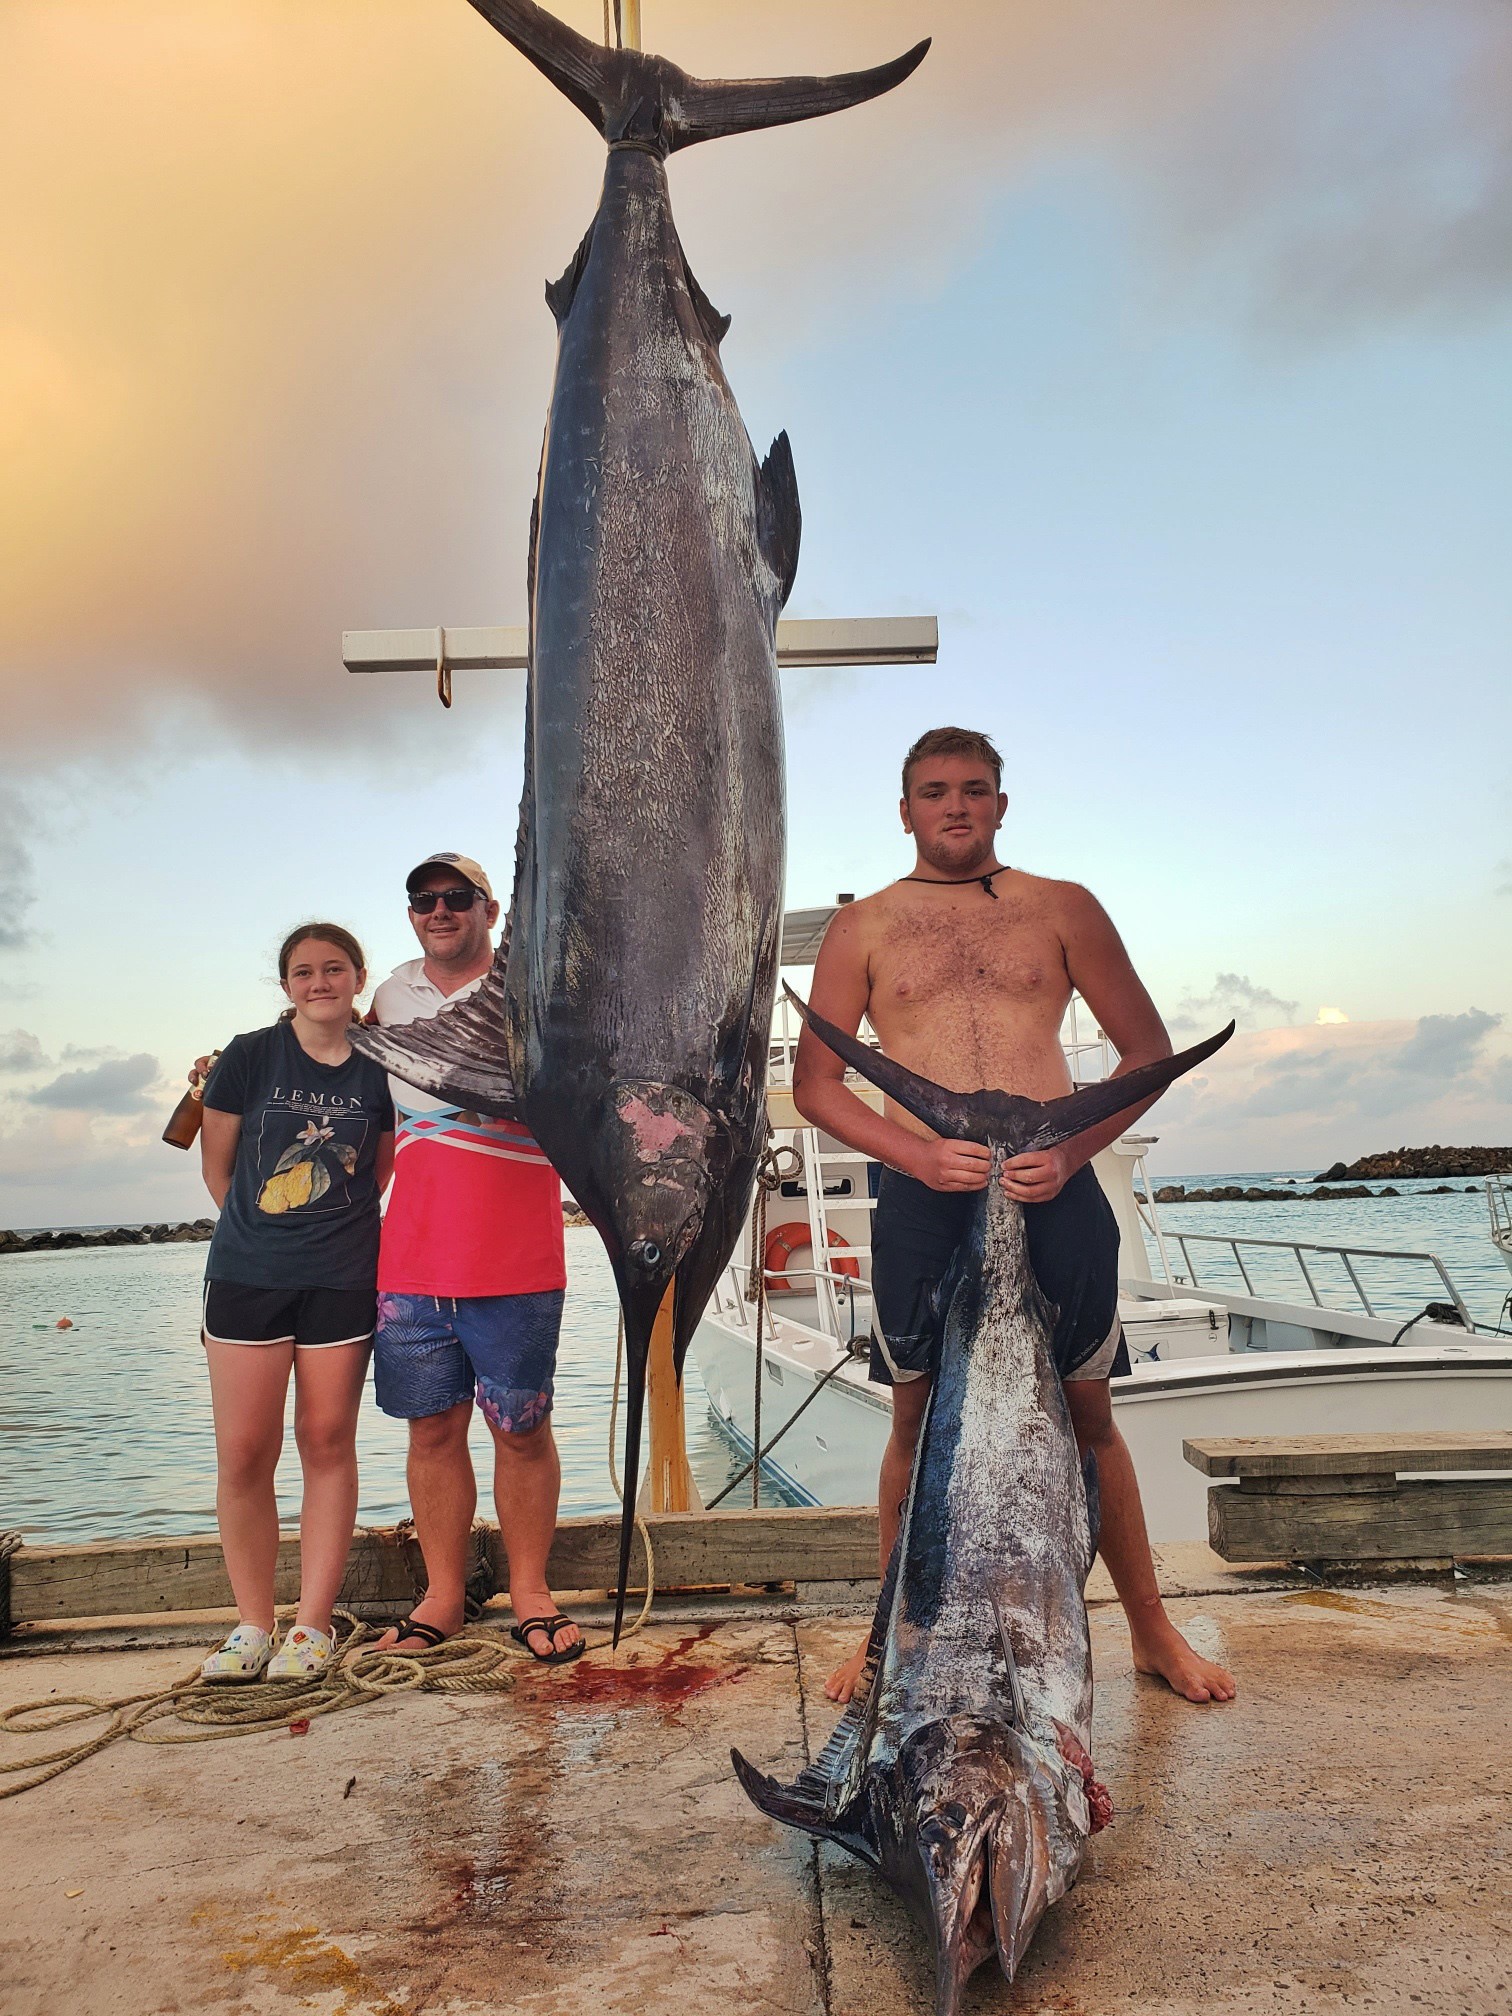 A magnificent start to the 2022 marlin season